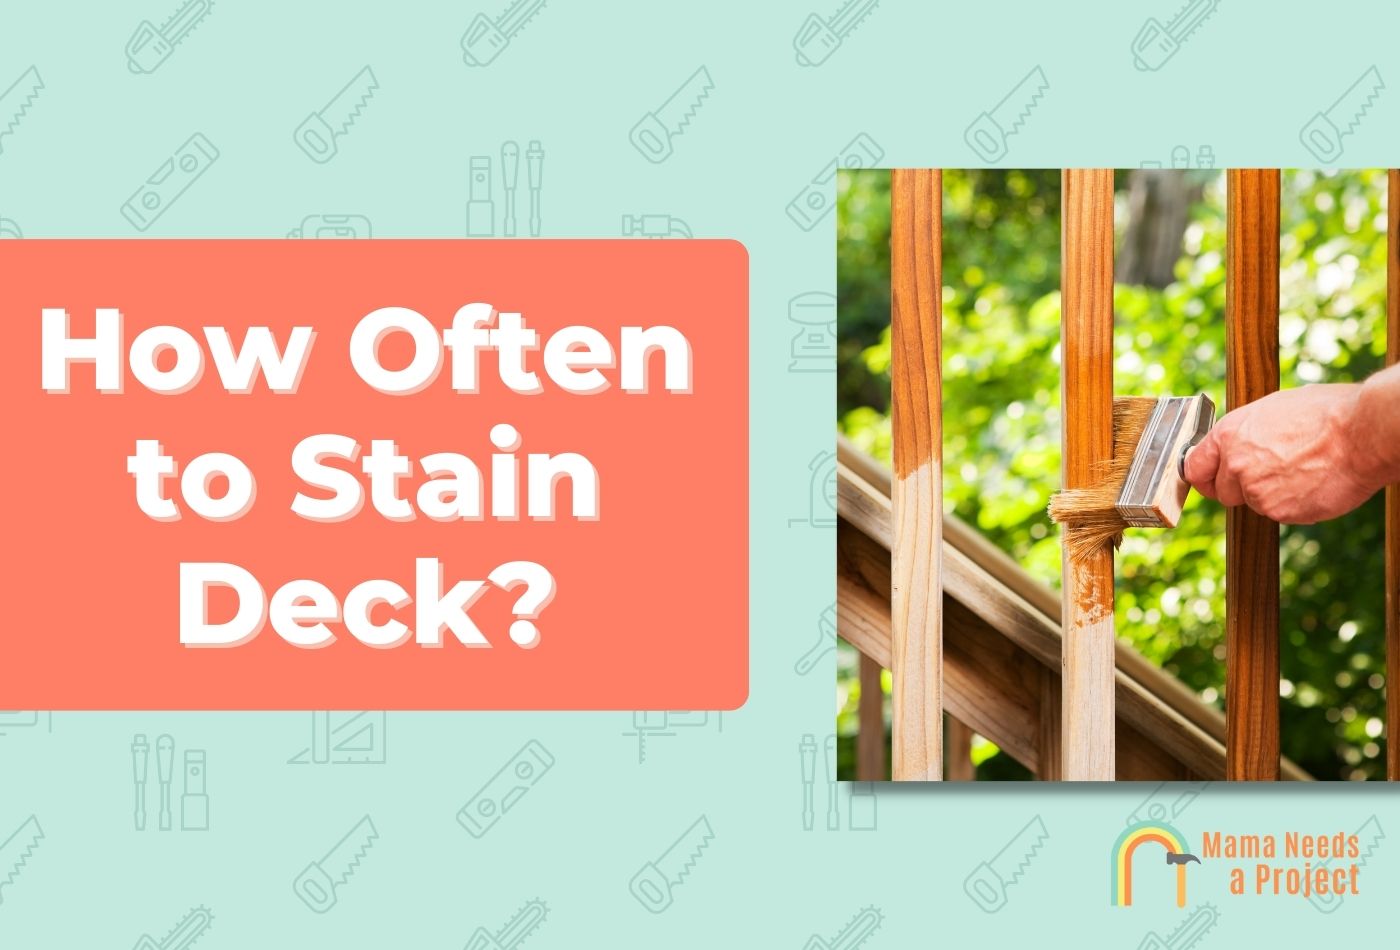 How Often to Stain Deck?